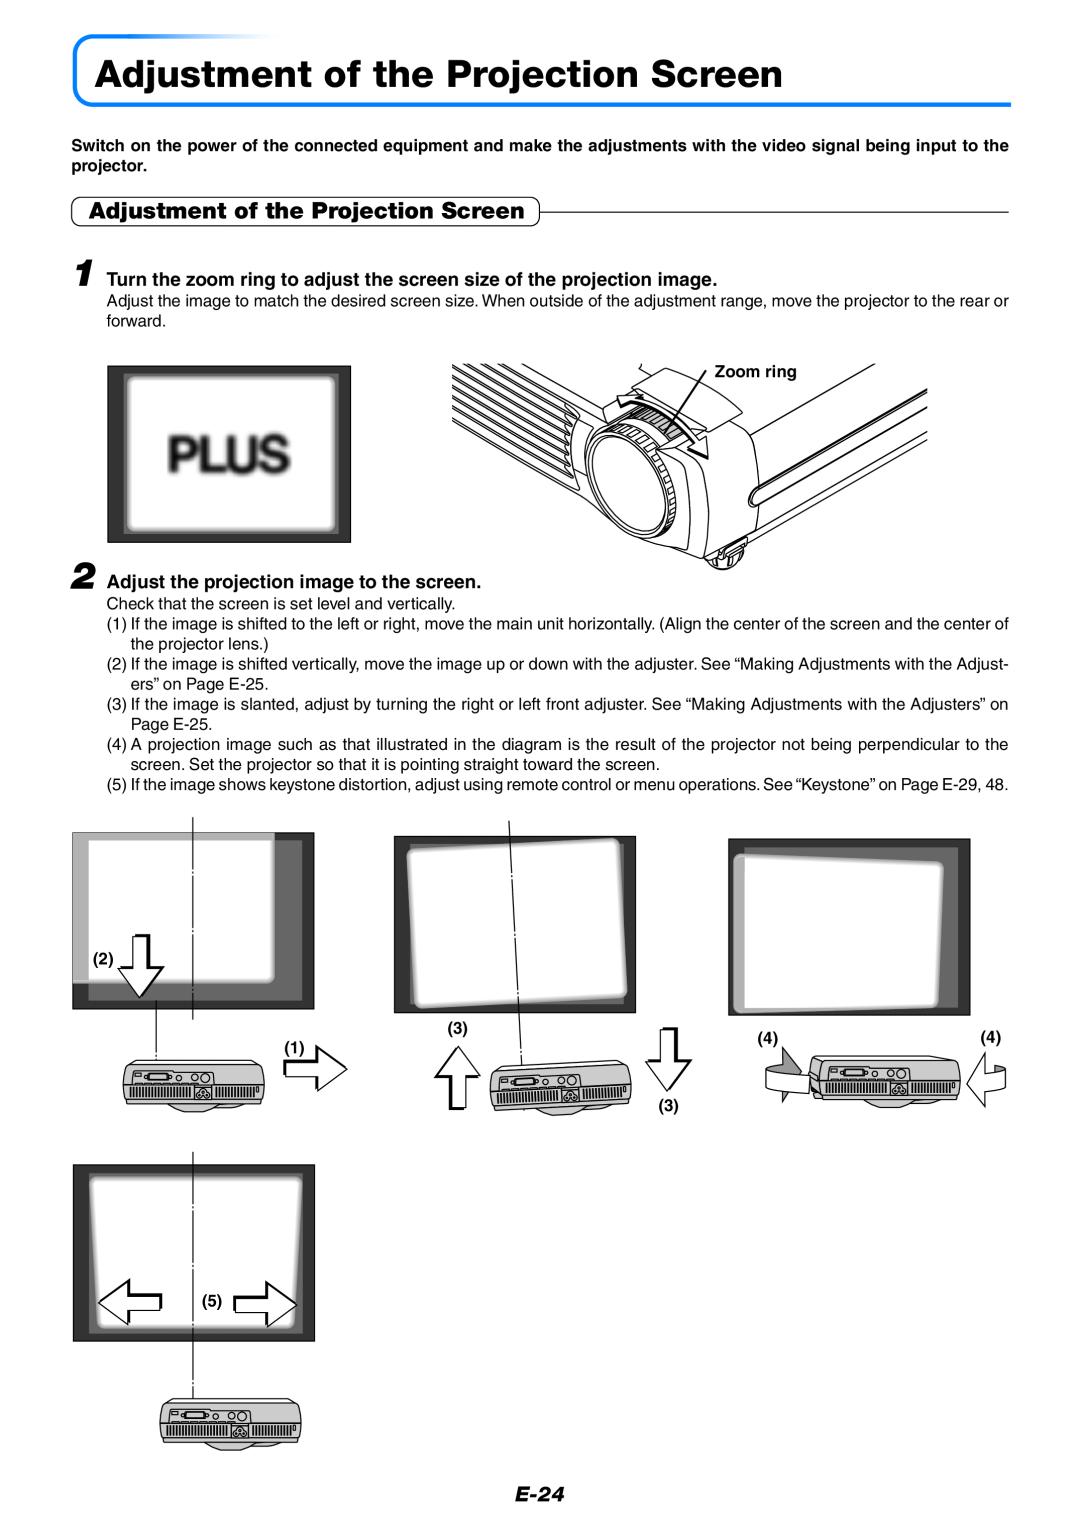 PLUS Vision U4-232 Adjustment of the Projection Screen, E-24, Adjust the projection image to the screen, Zoom ring 